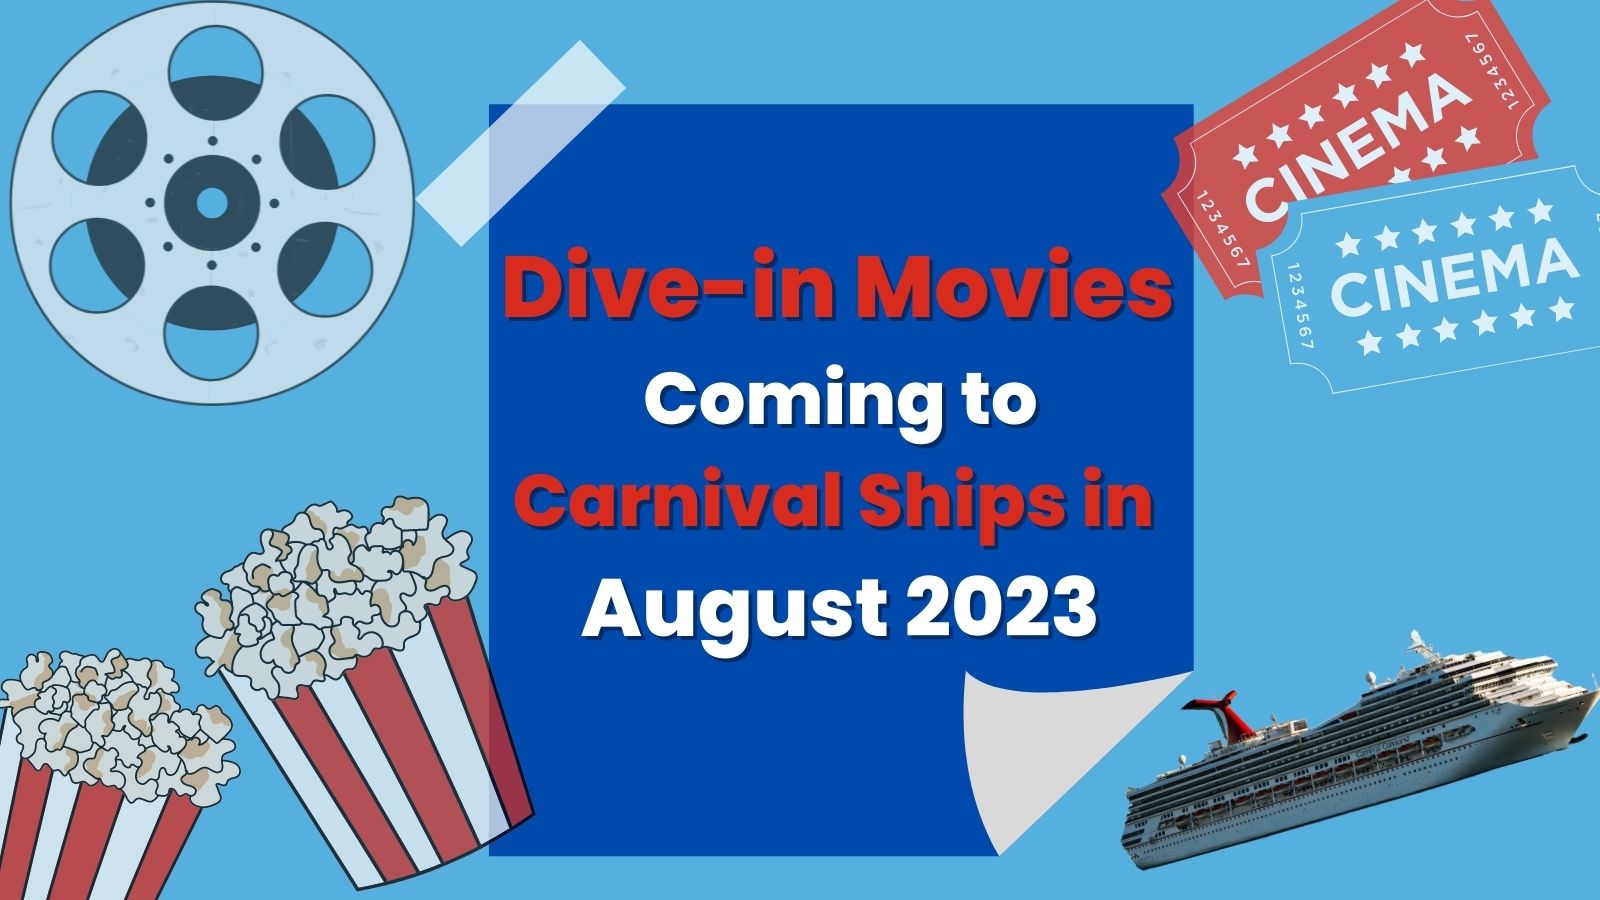 Carnival Movies for August 2023 · Prof. Cruise Cruise News Hubb